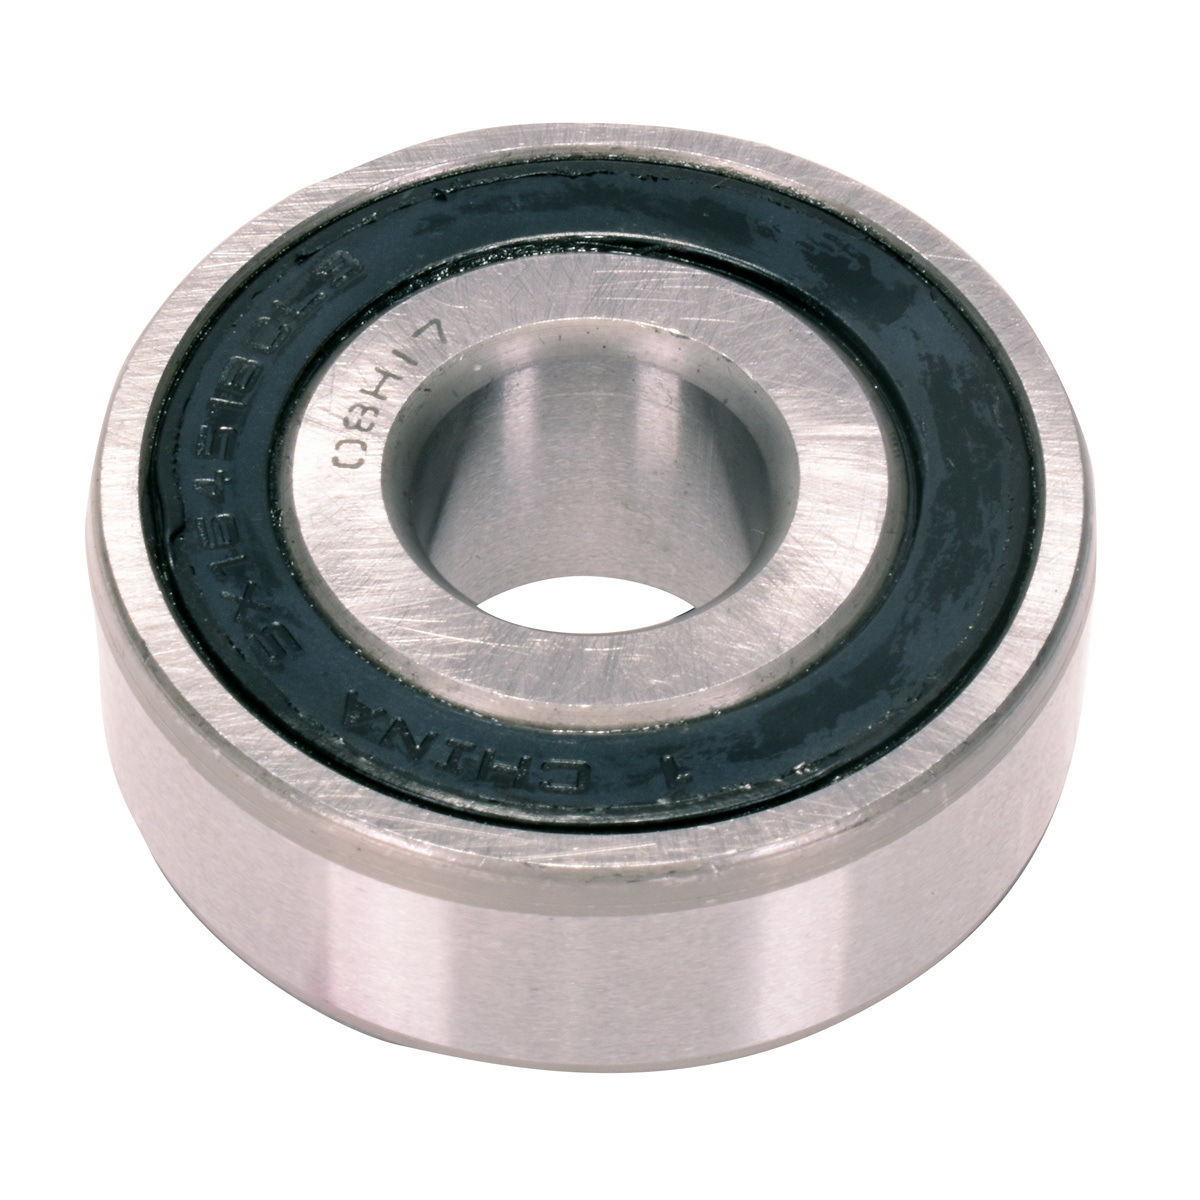 Caster Wheel Bearing for Z500 and Z900 Series ZTrak